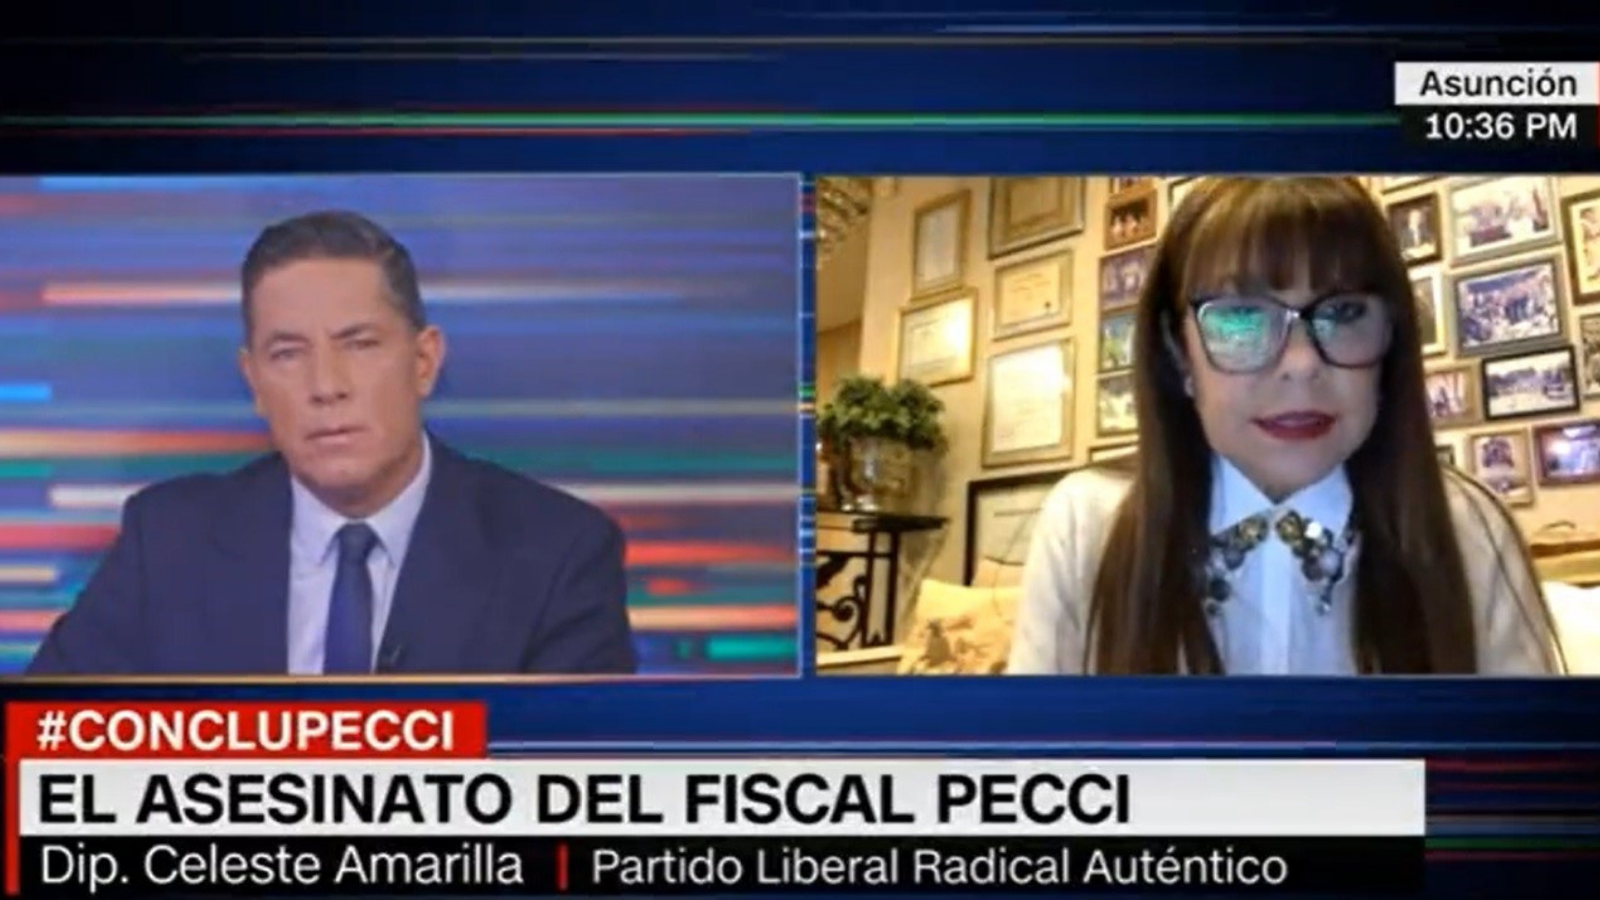 Celeste Amarilla is censored on CNN for linking Cartes to the murder of prosecutor Pecci